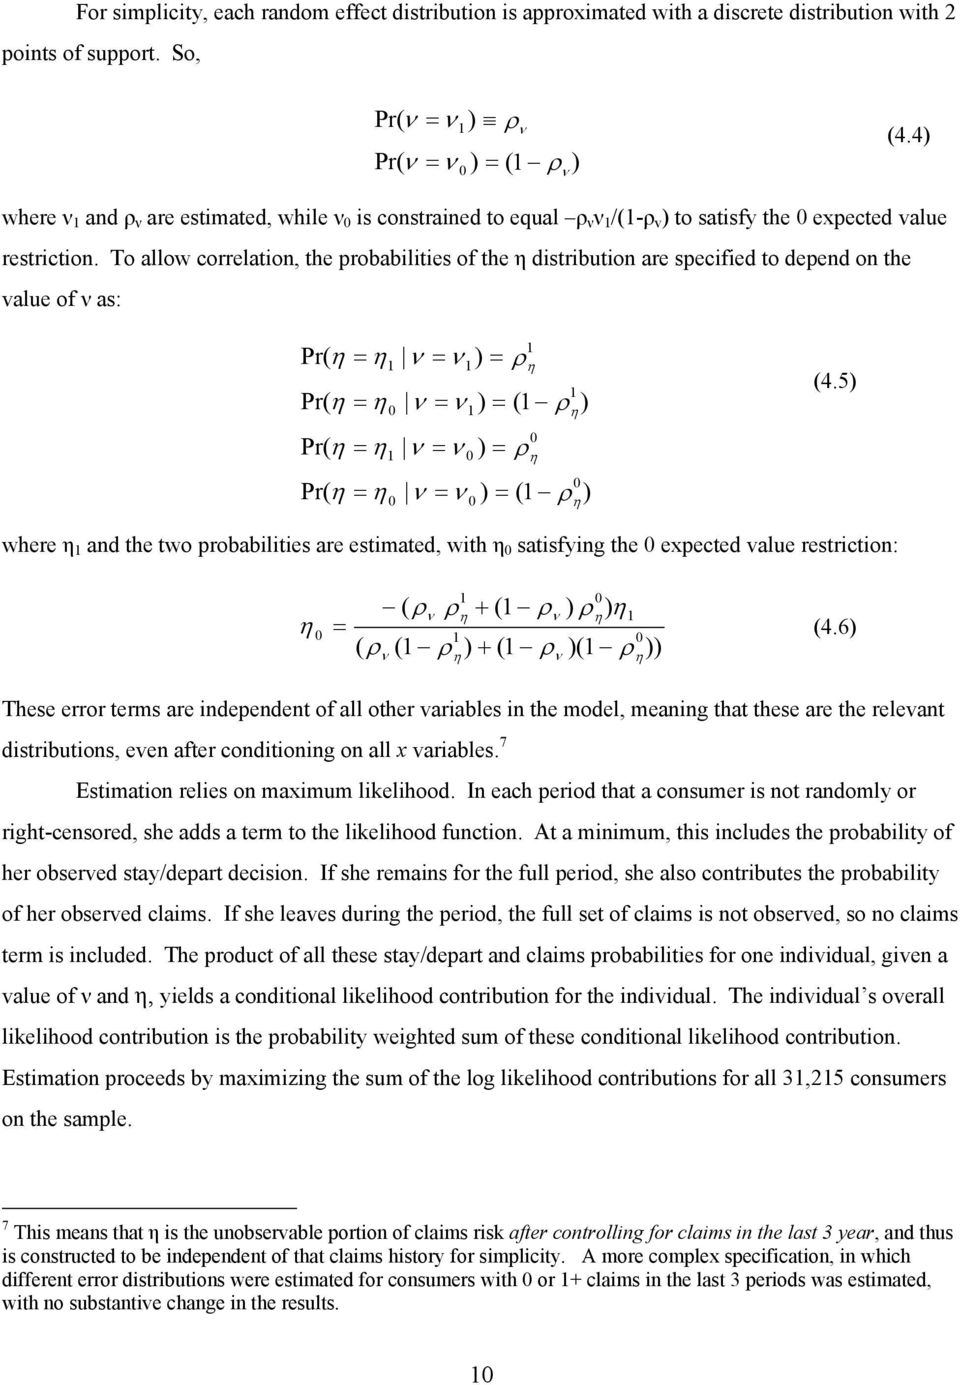 To allow correlation, the probabilities of the η distribution are specified to depend on the value of ν as: Pr( η = η ν = ν ) = ρ Pr( η = η ν = ν ) = ( ρ ) 0 0 Pr( η = η ν = ν ) = ρ 0 Pr( η = η ν = ν